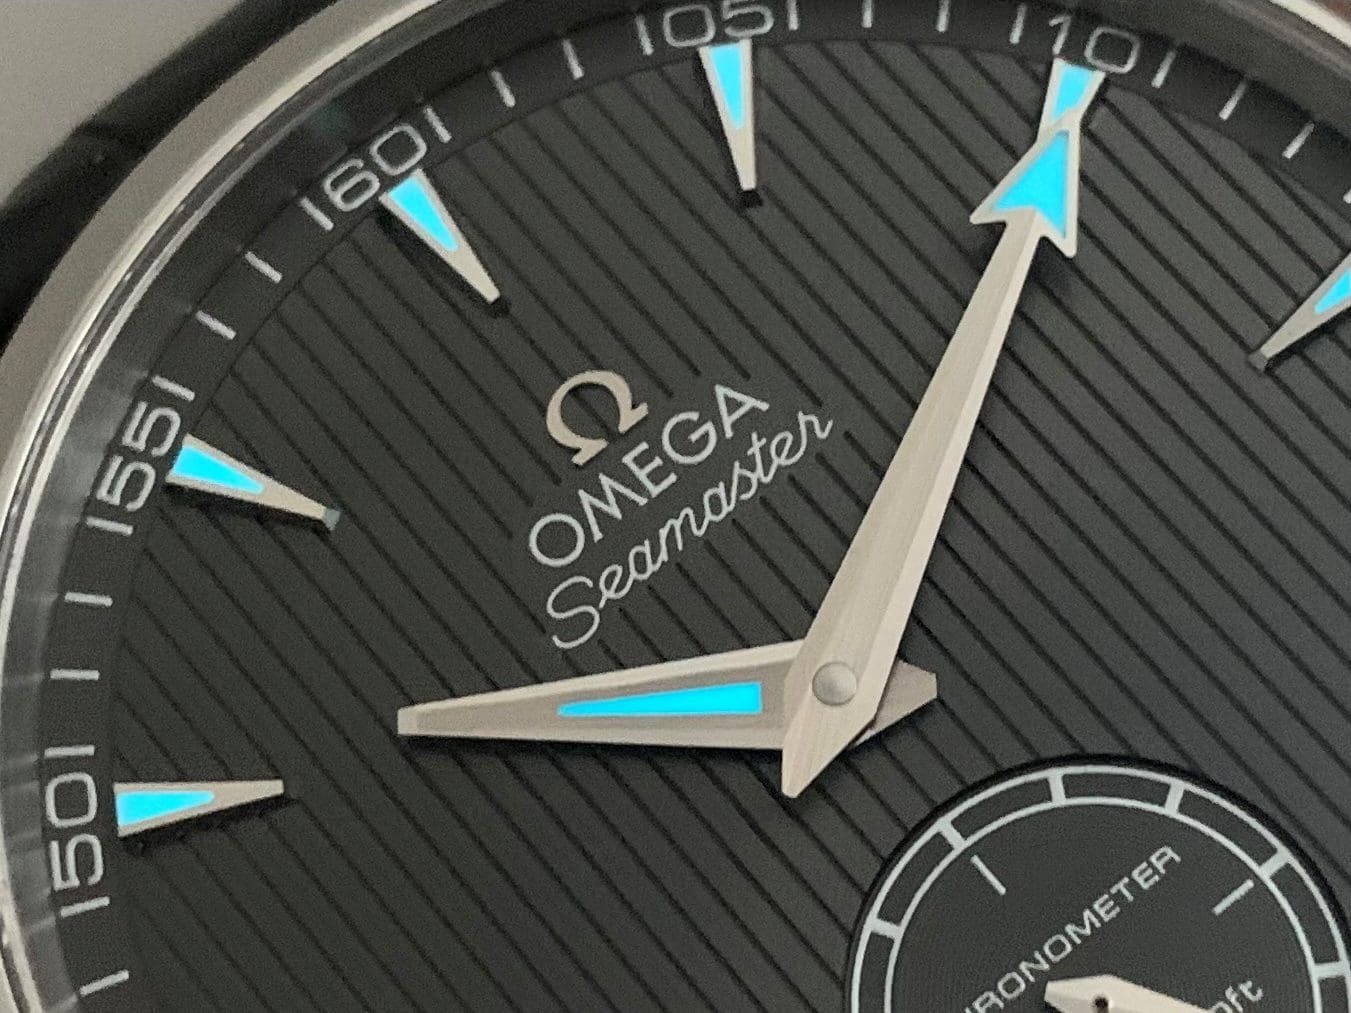 The Omega Aqua Terra XXL is a whopping great land yacht for the wrist